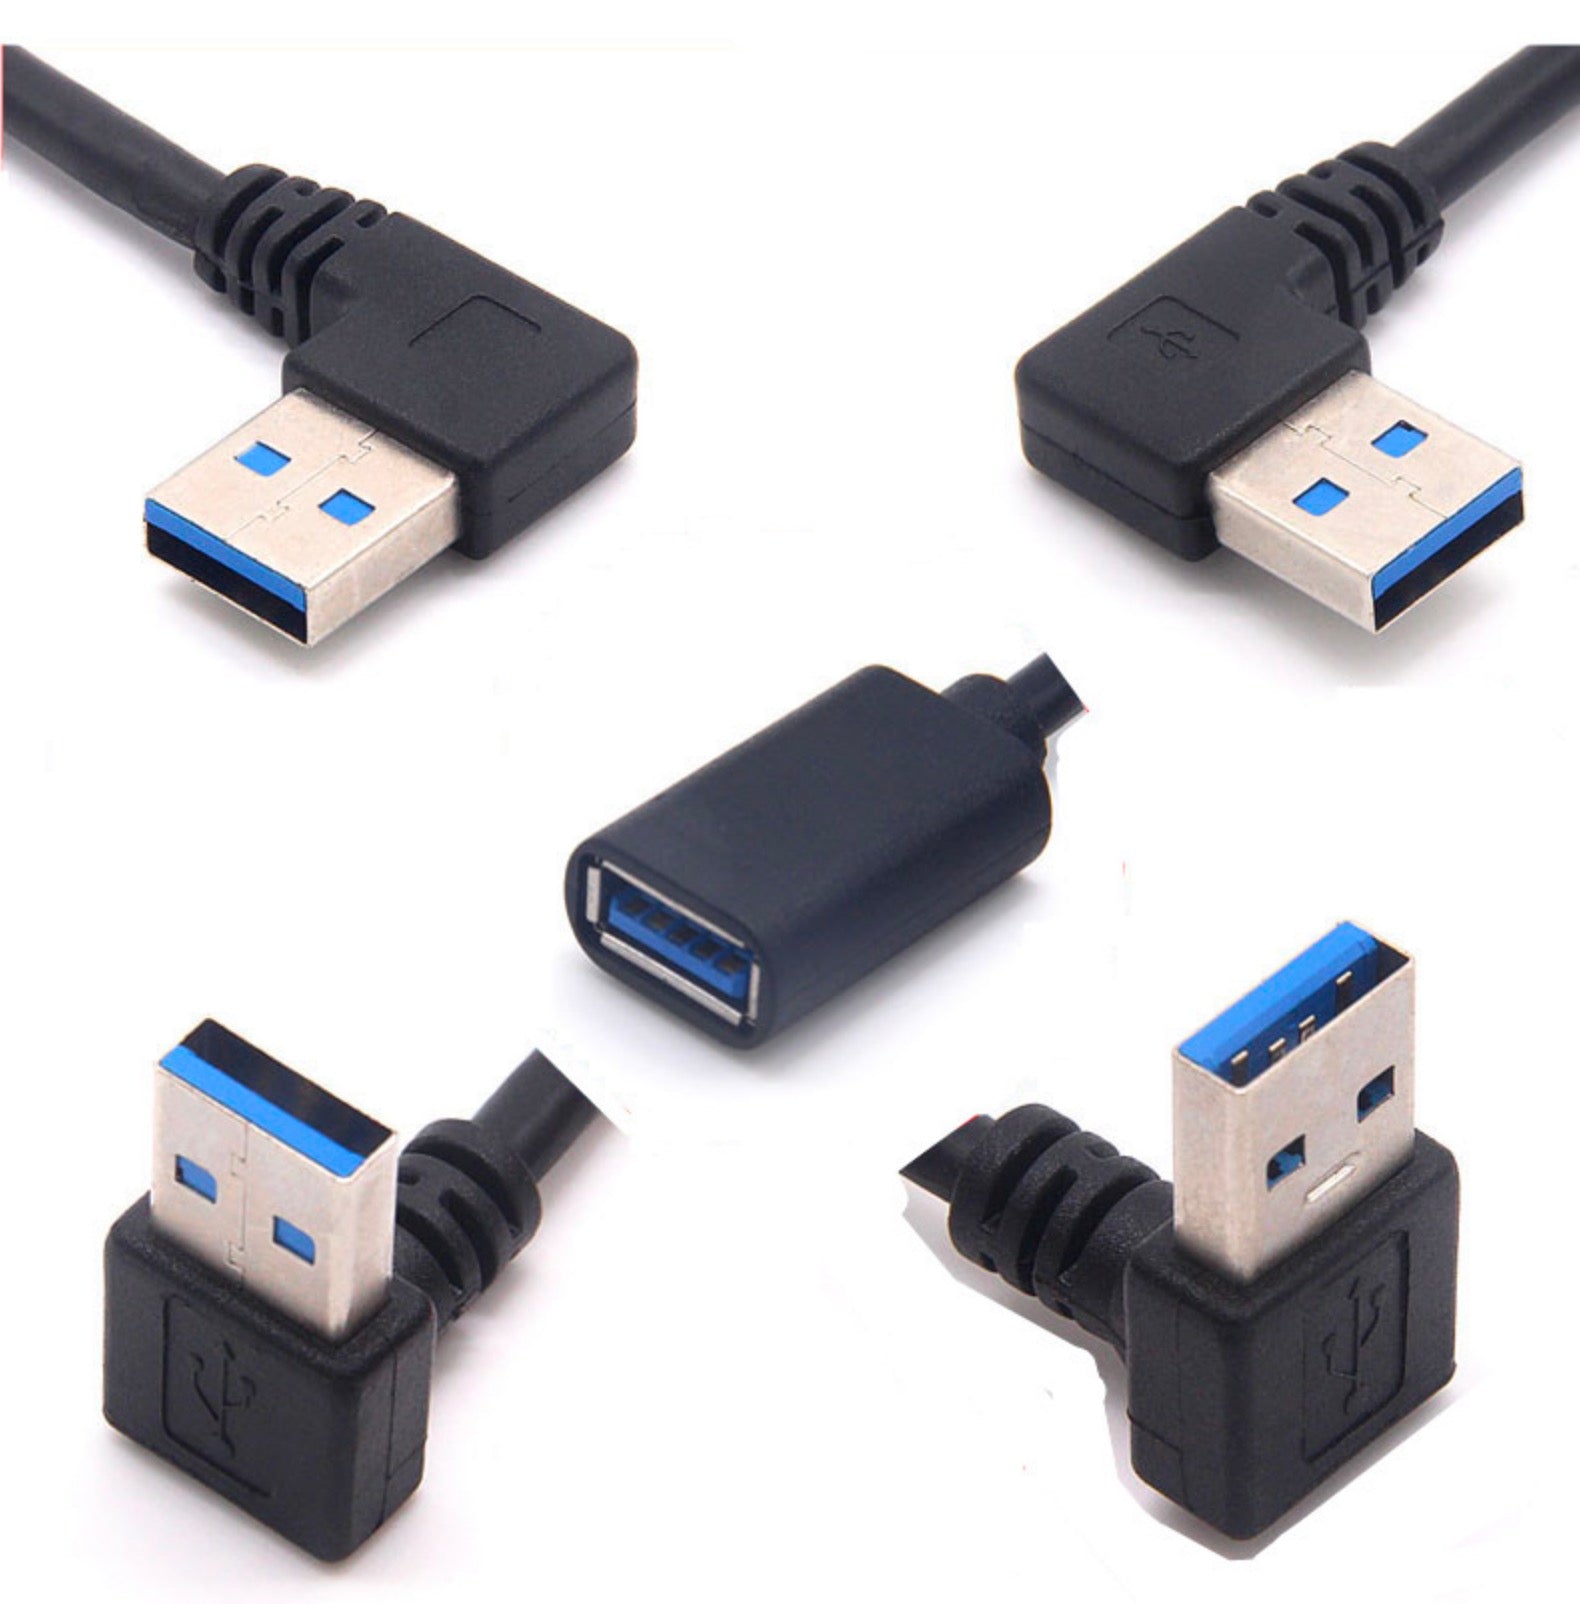 USB 3.0 Type A Male to Female Extension Cable 0.5m